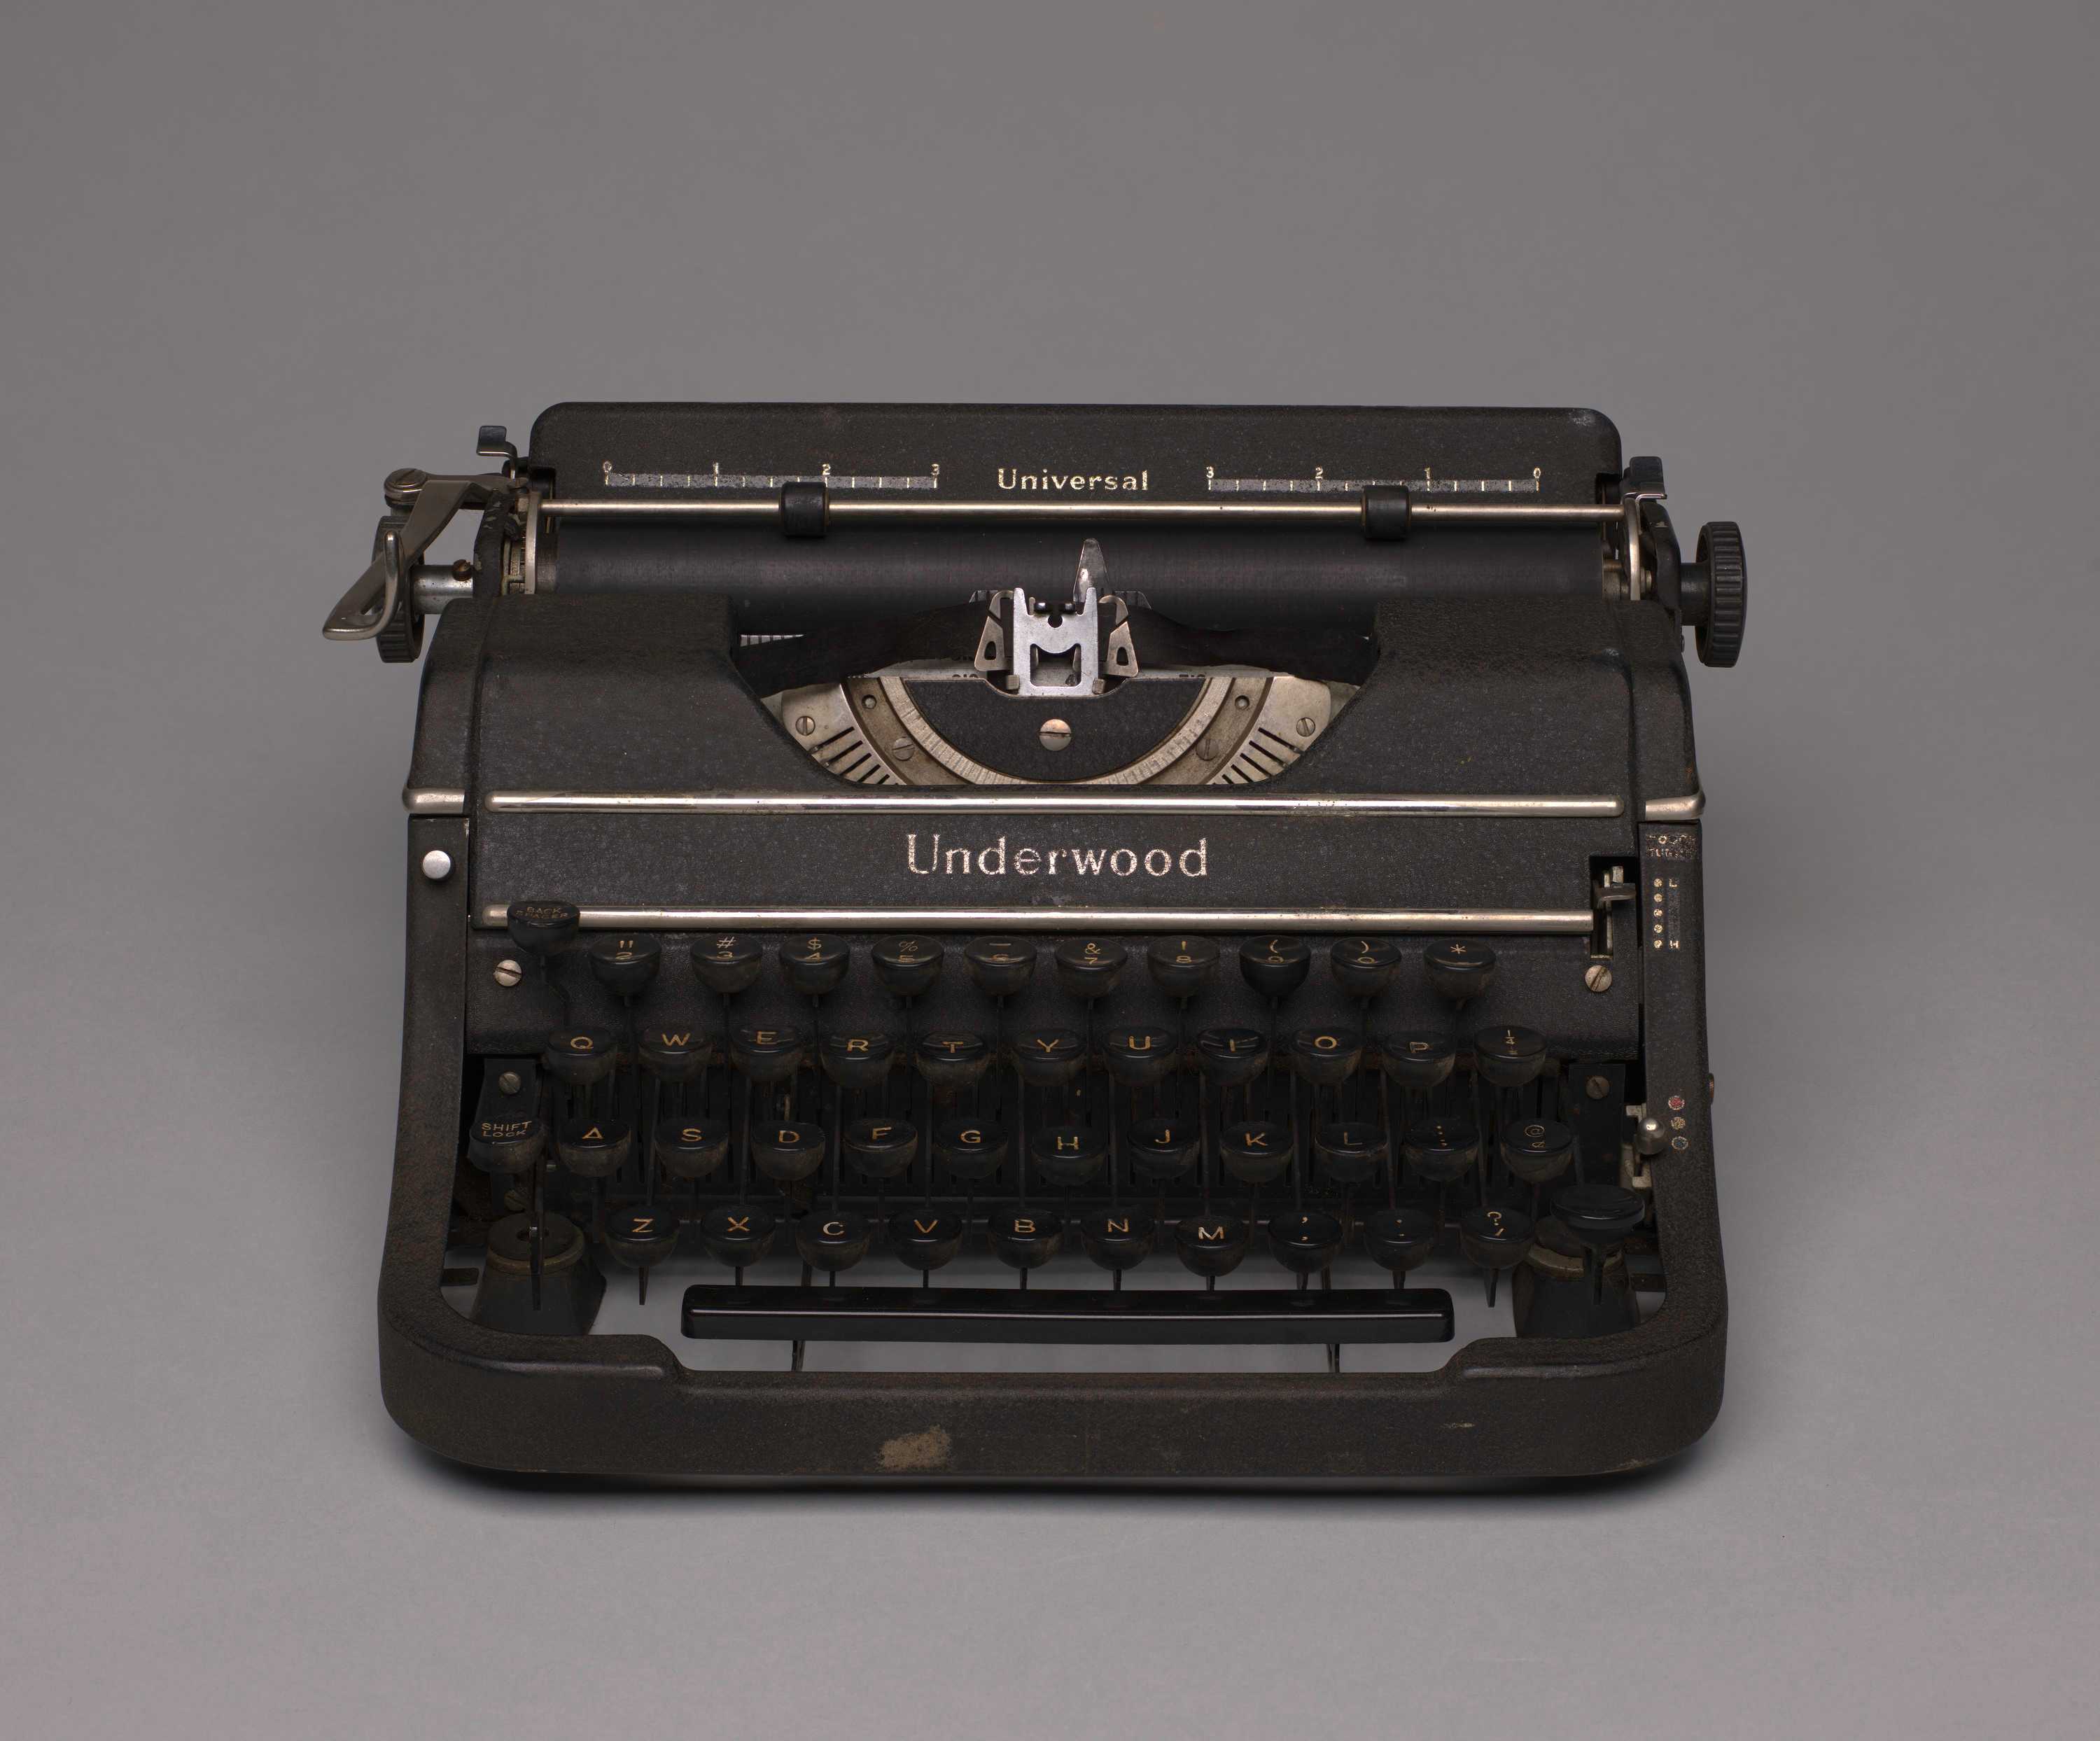 Image of a typewriter from the Nation of Islam’s Temple No. 7, Harlem, New York.